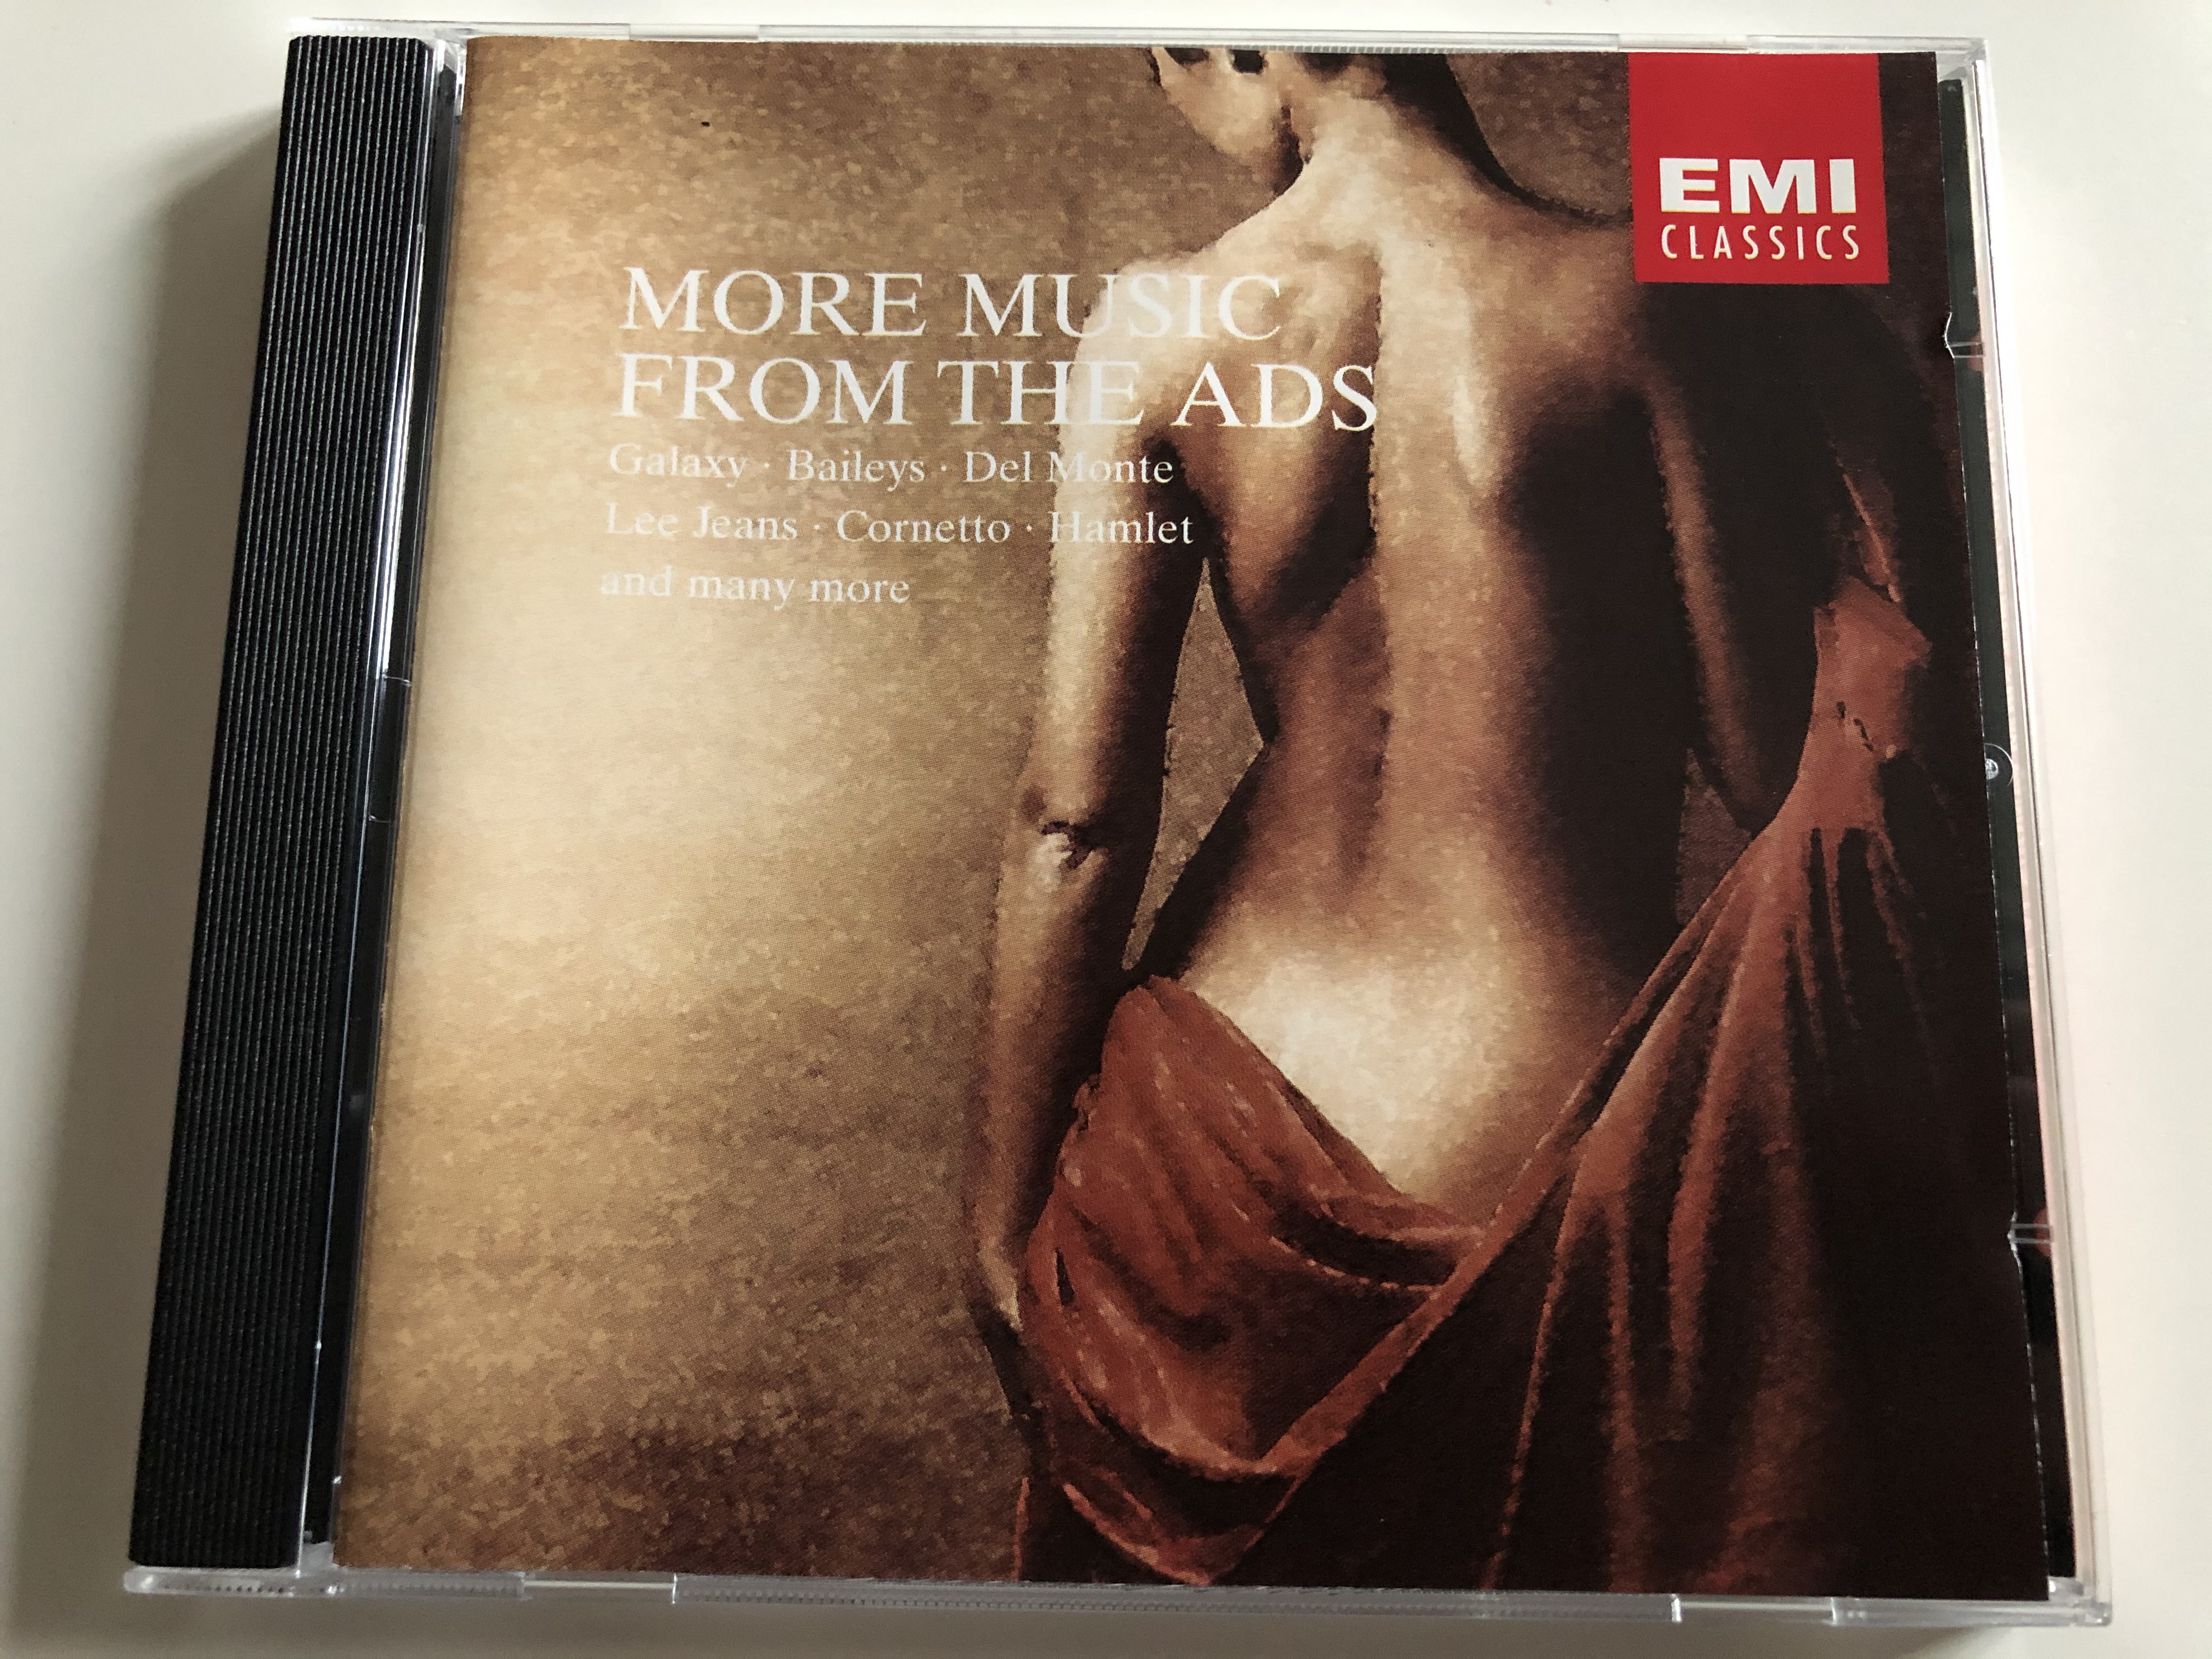 more-music-from-the-ads-galaxy-baileys-del-monte-lee-jeans-cornetto-hamlet-and-many-more-emi-classics-audio-cd-1996-724356949225-1-.jpg